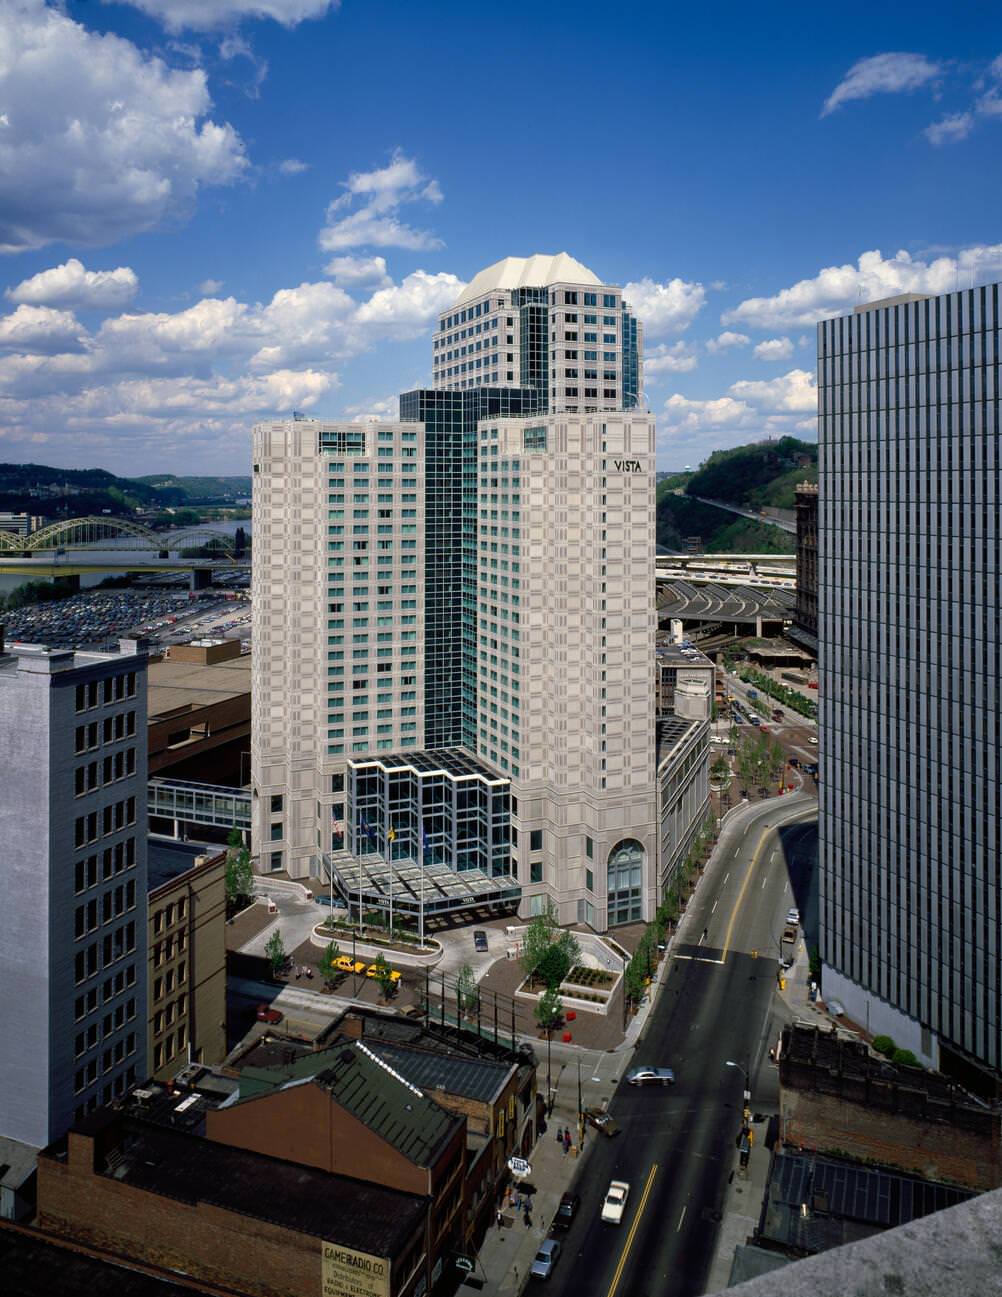 Scenery of Pittsburgh, Pennsylvania in the 1980s.